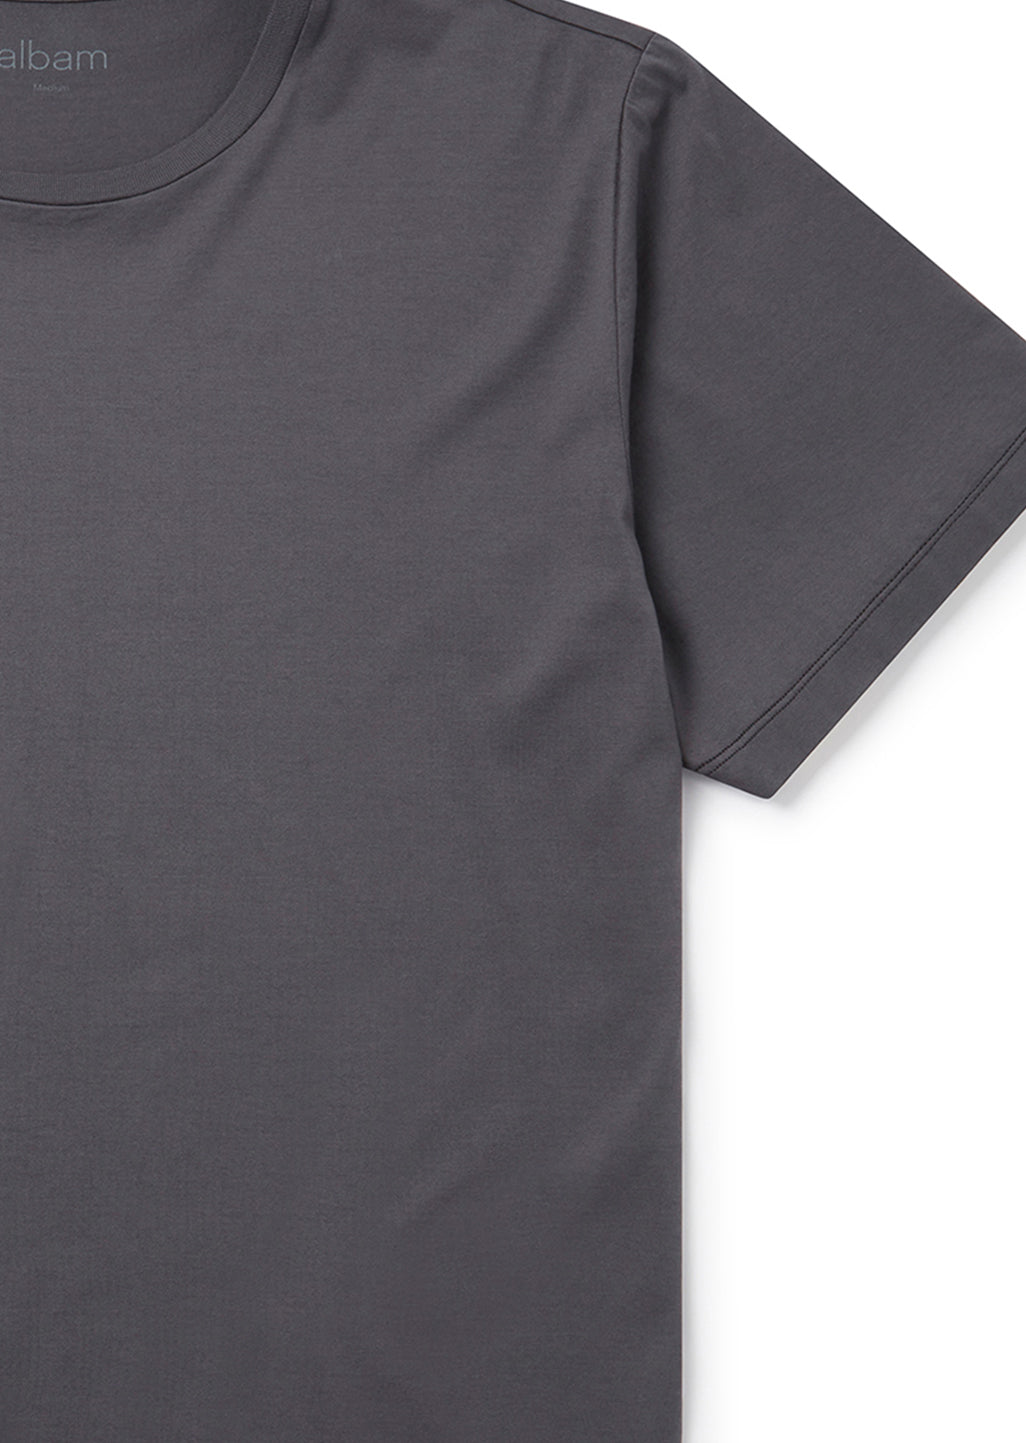 Classic T-Shirt in Charcoal